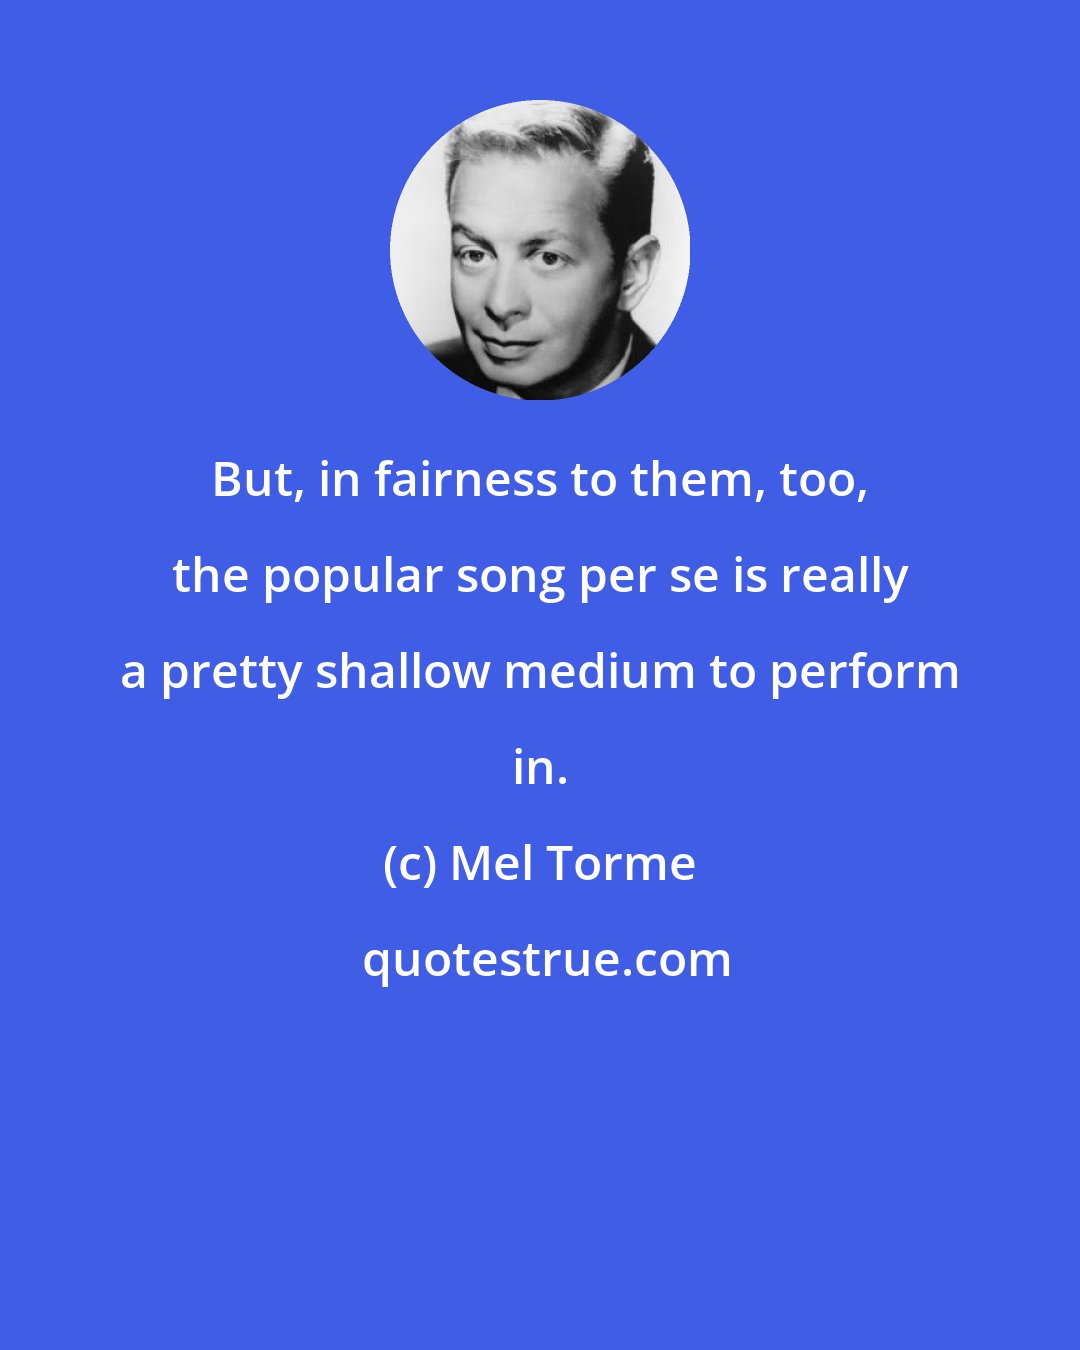 Mel Torme: But, in fairness to them, too, the popular song per se is really a pretty shallow medium to perform in.